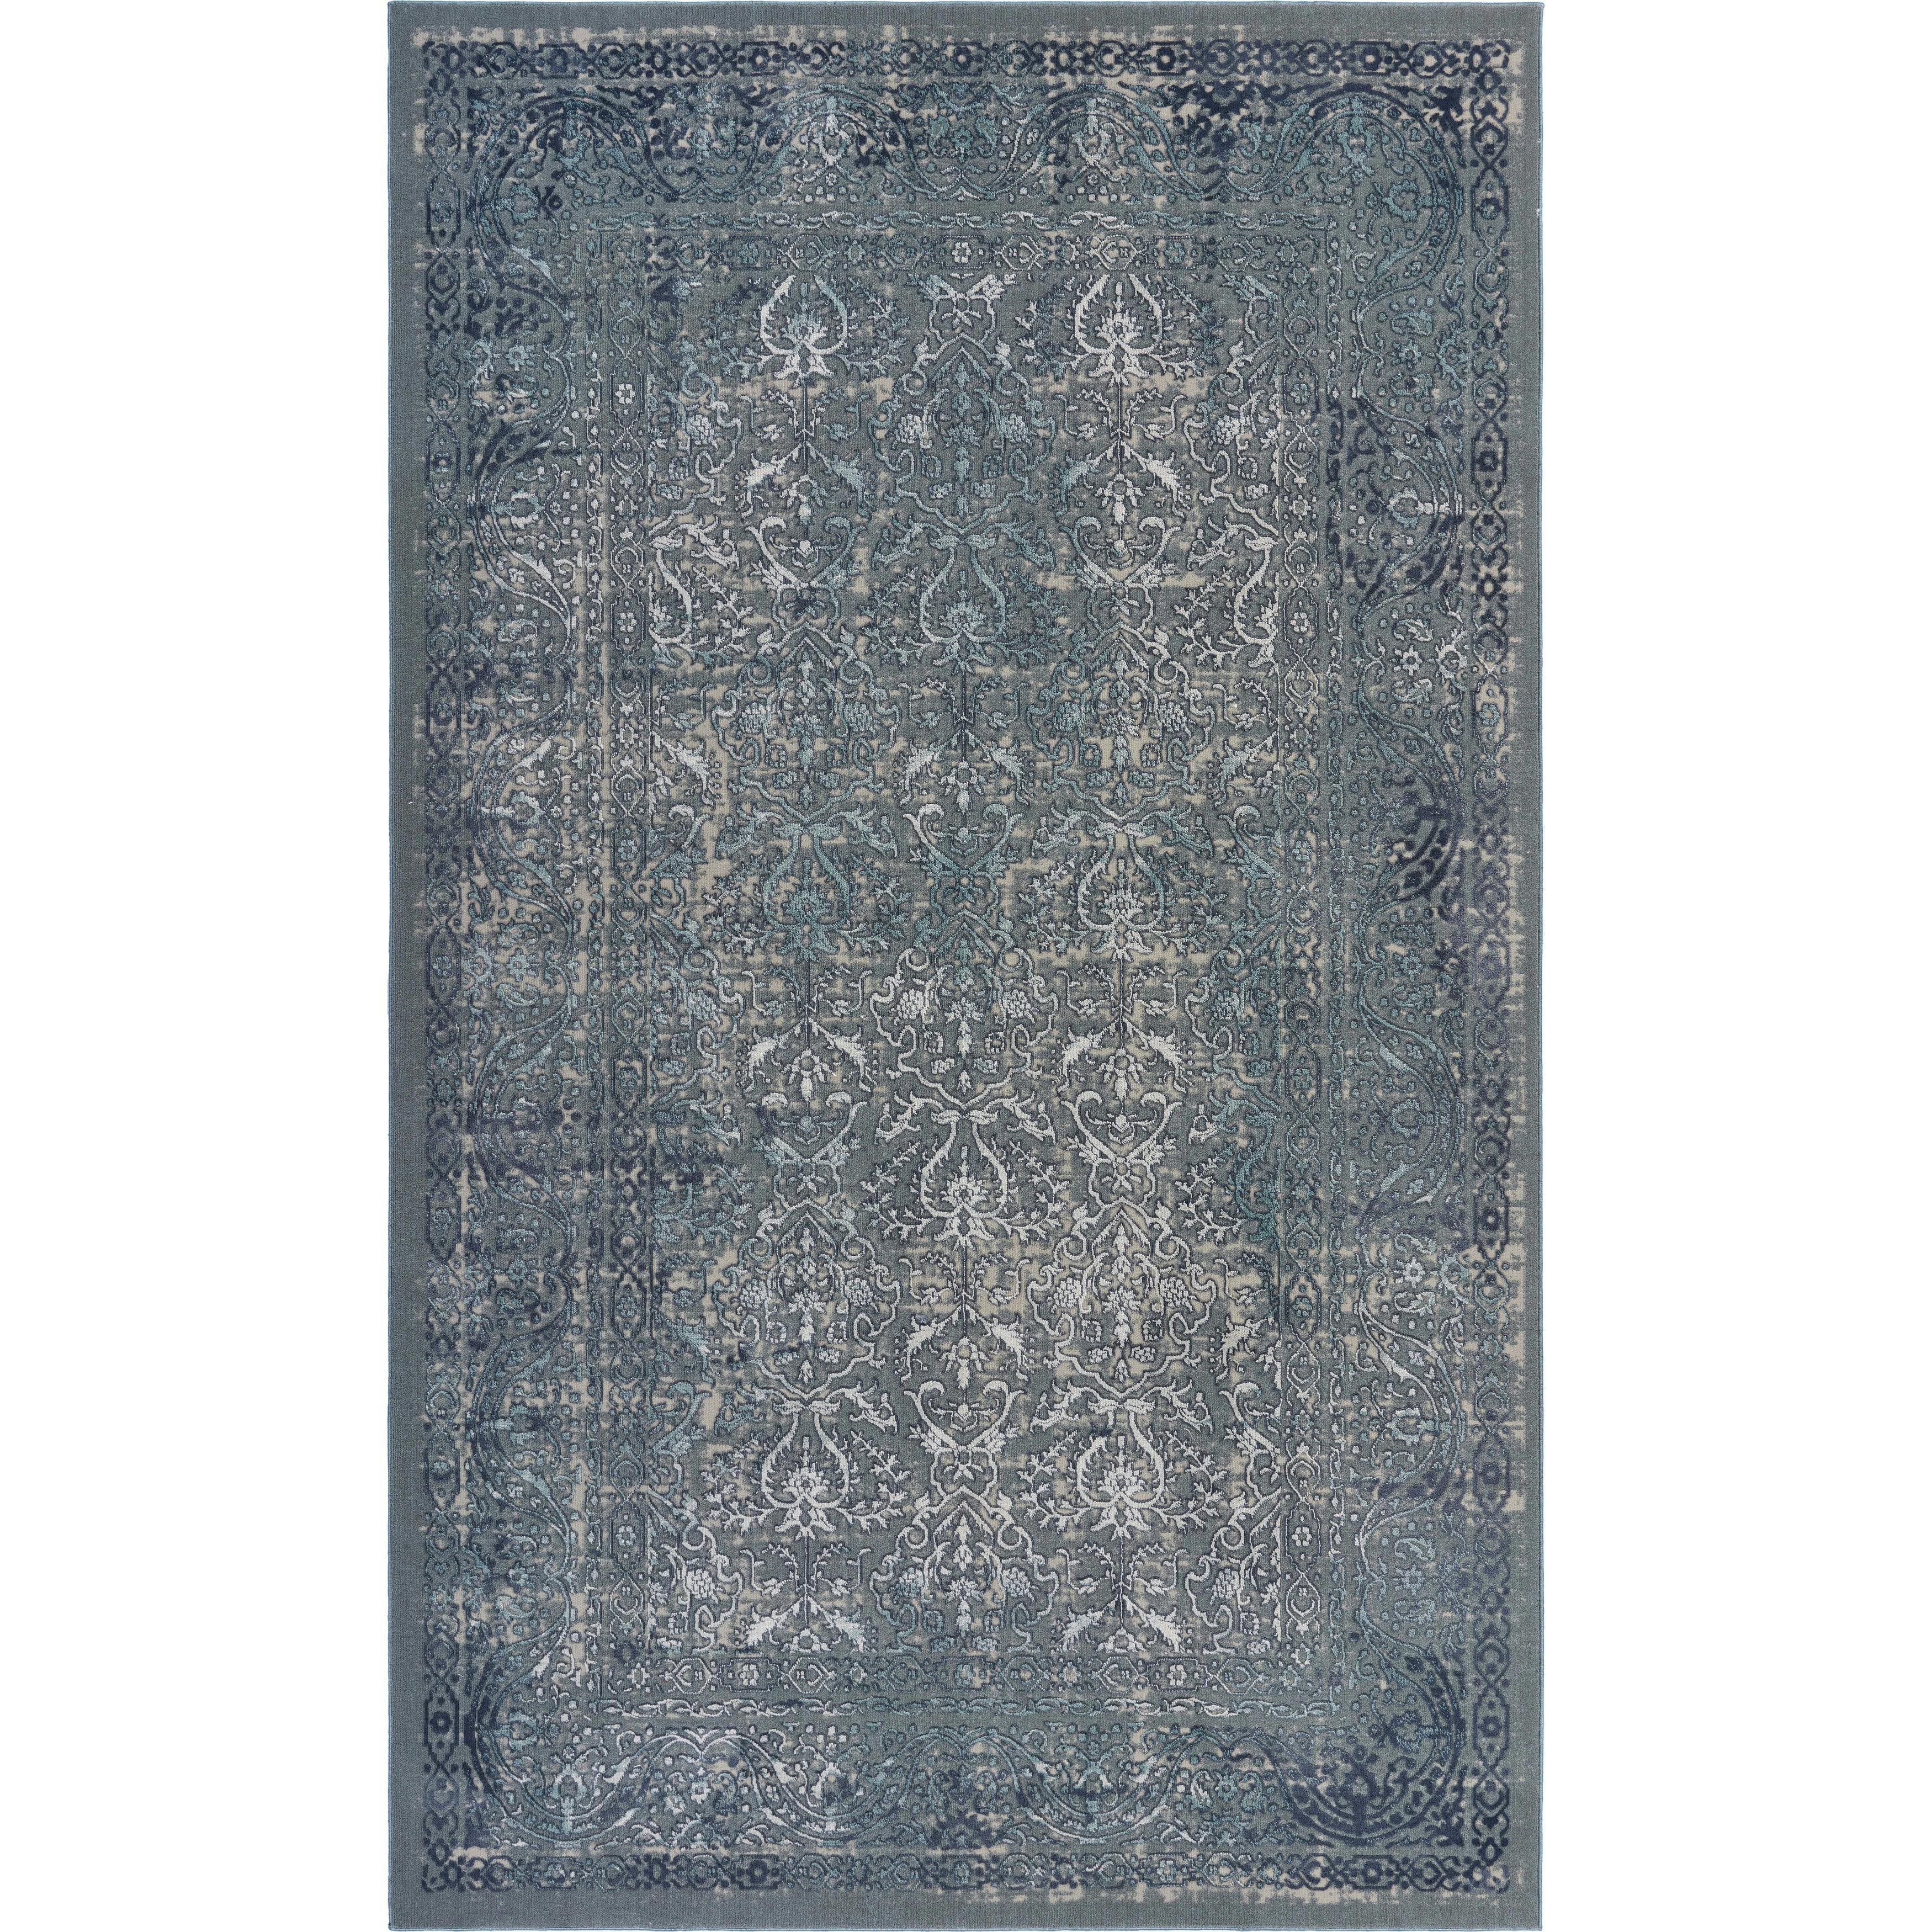 Contemporary Hand-Knotted Blue Synthetic Area Rug 9'6" x 13'